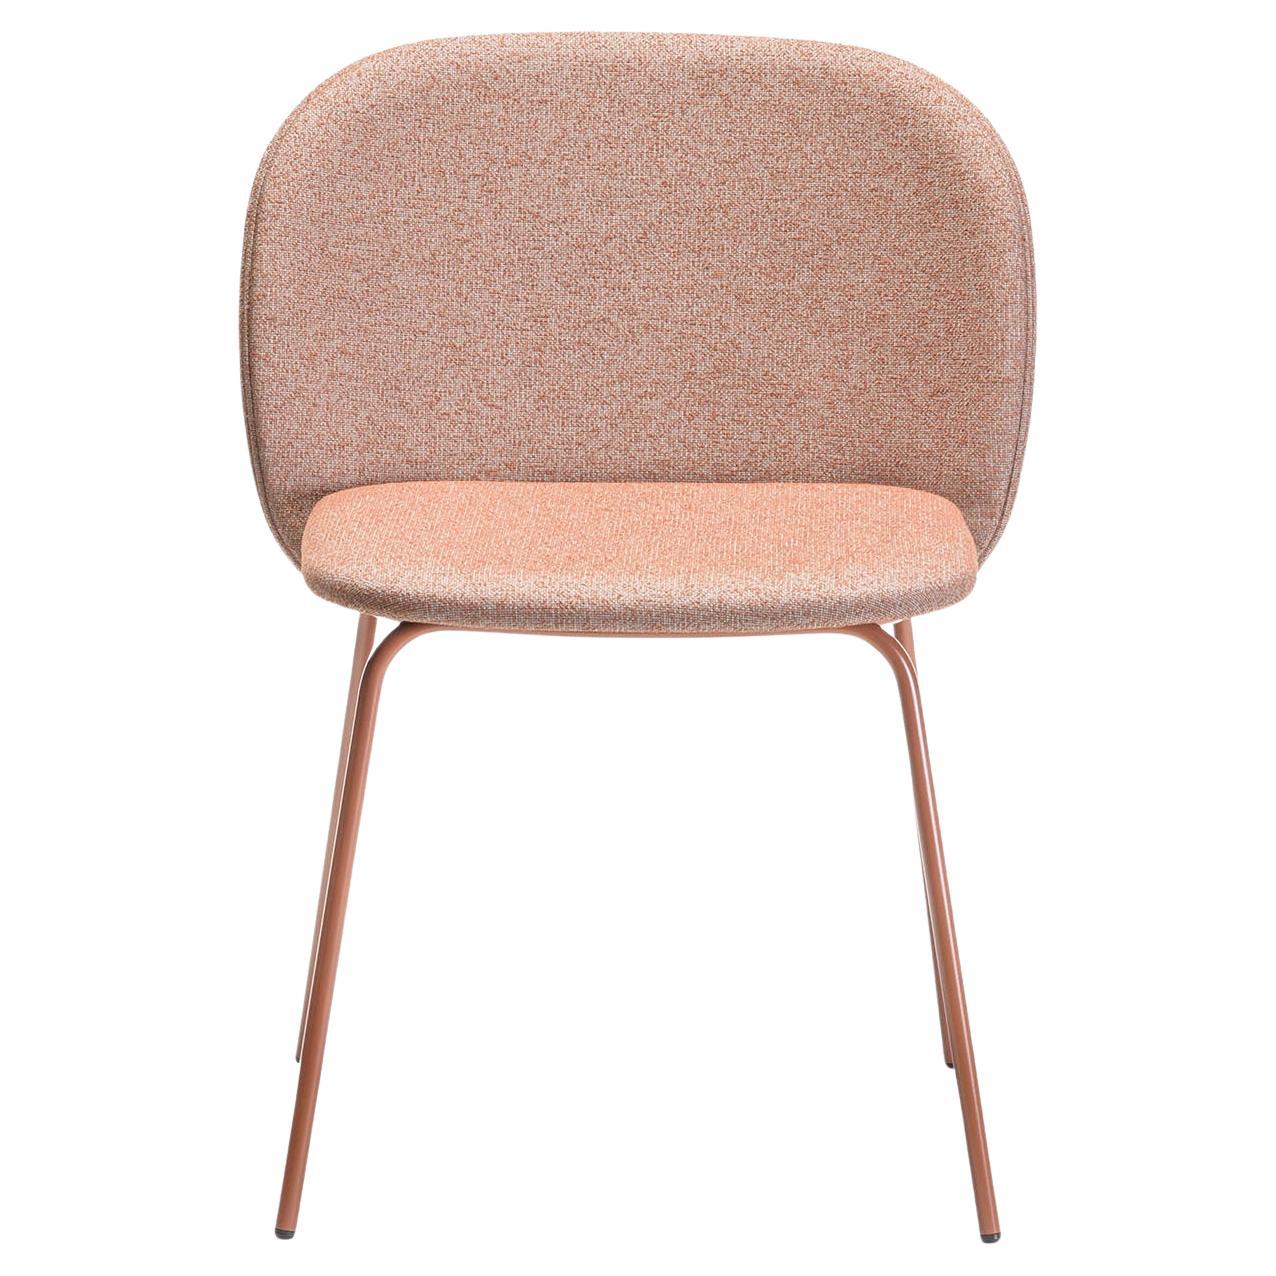 Chips M Terracotta Chair By Studio Pastina For Sale